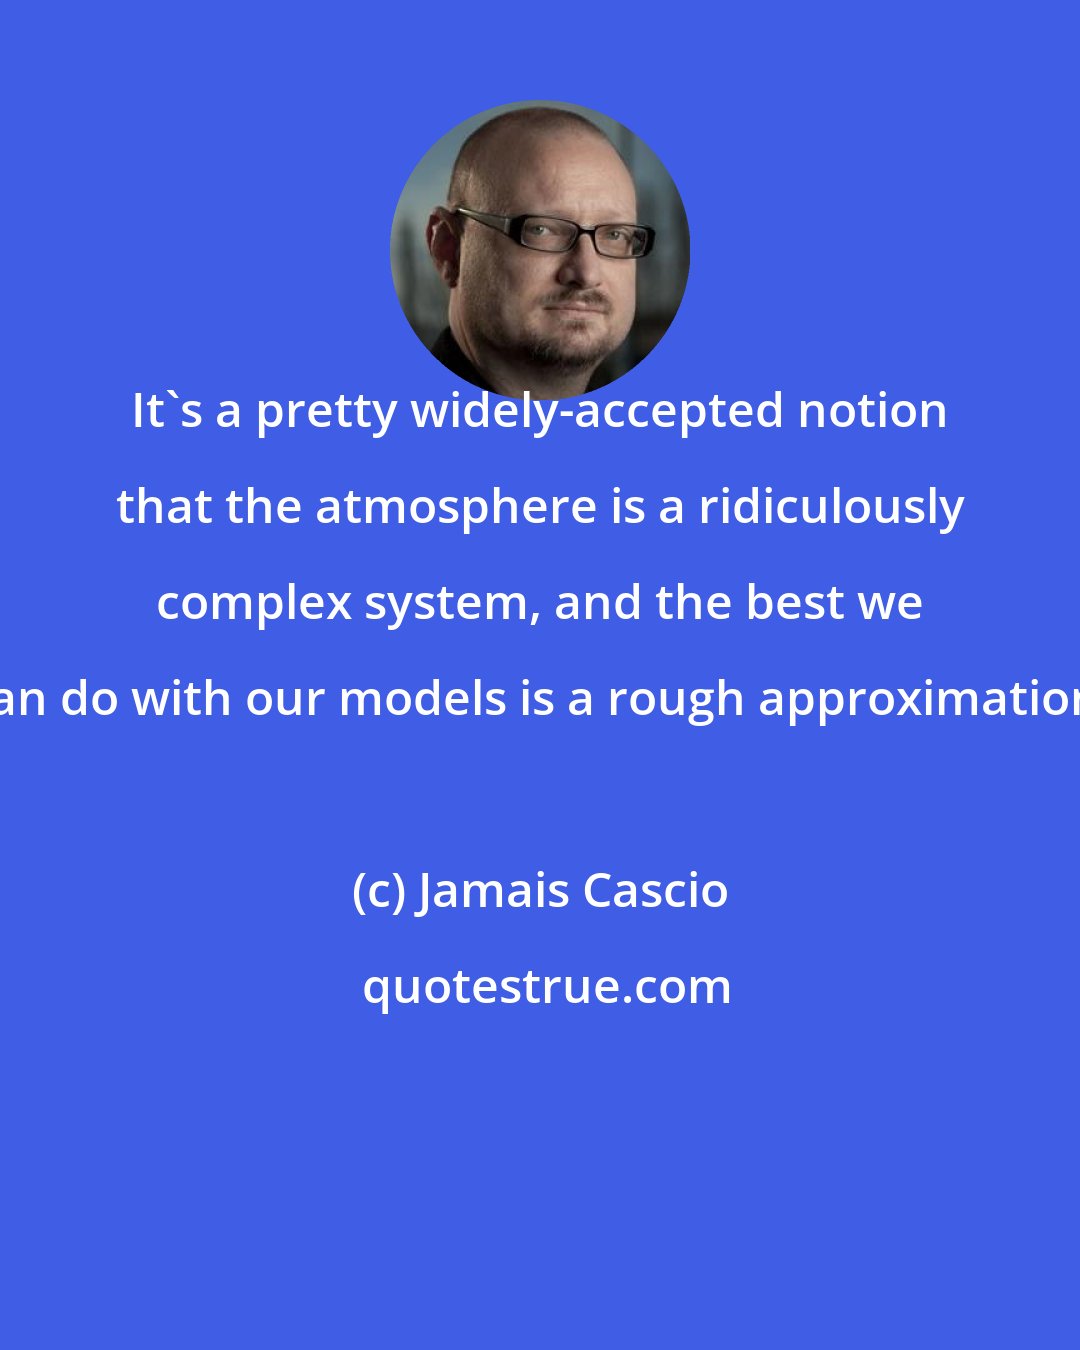 Jamais Cascio: It's a pretty widely-accepted notion that the atmosphere is a ridiculously complex system, and the best we can do with our models is a rough approximation.